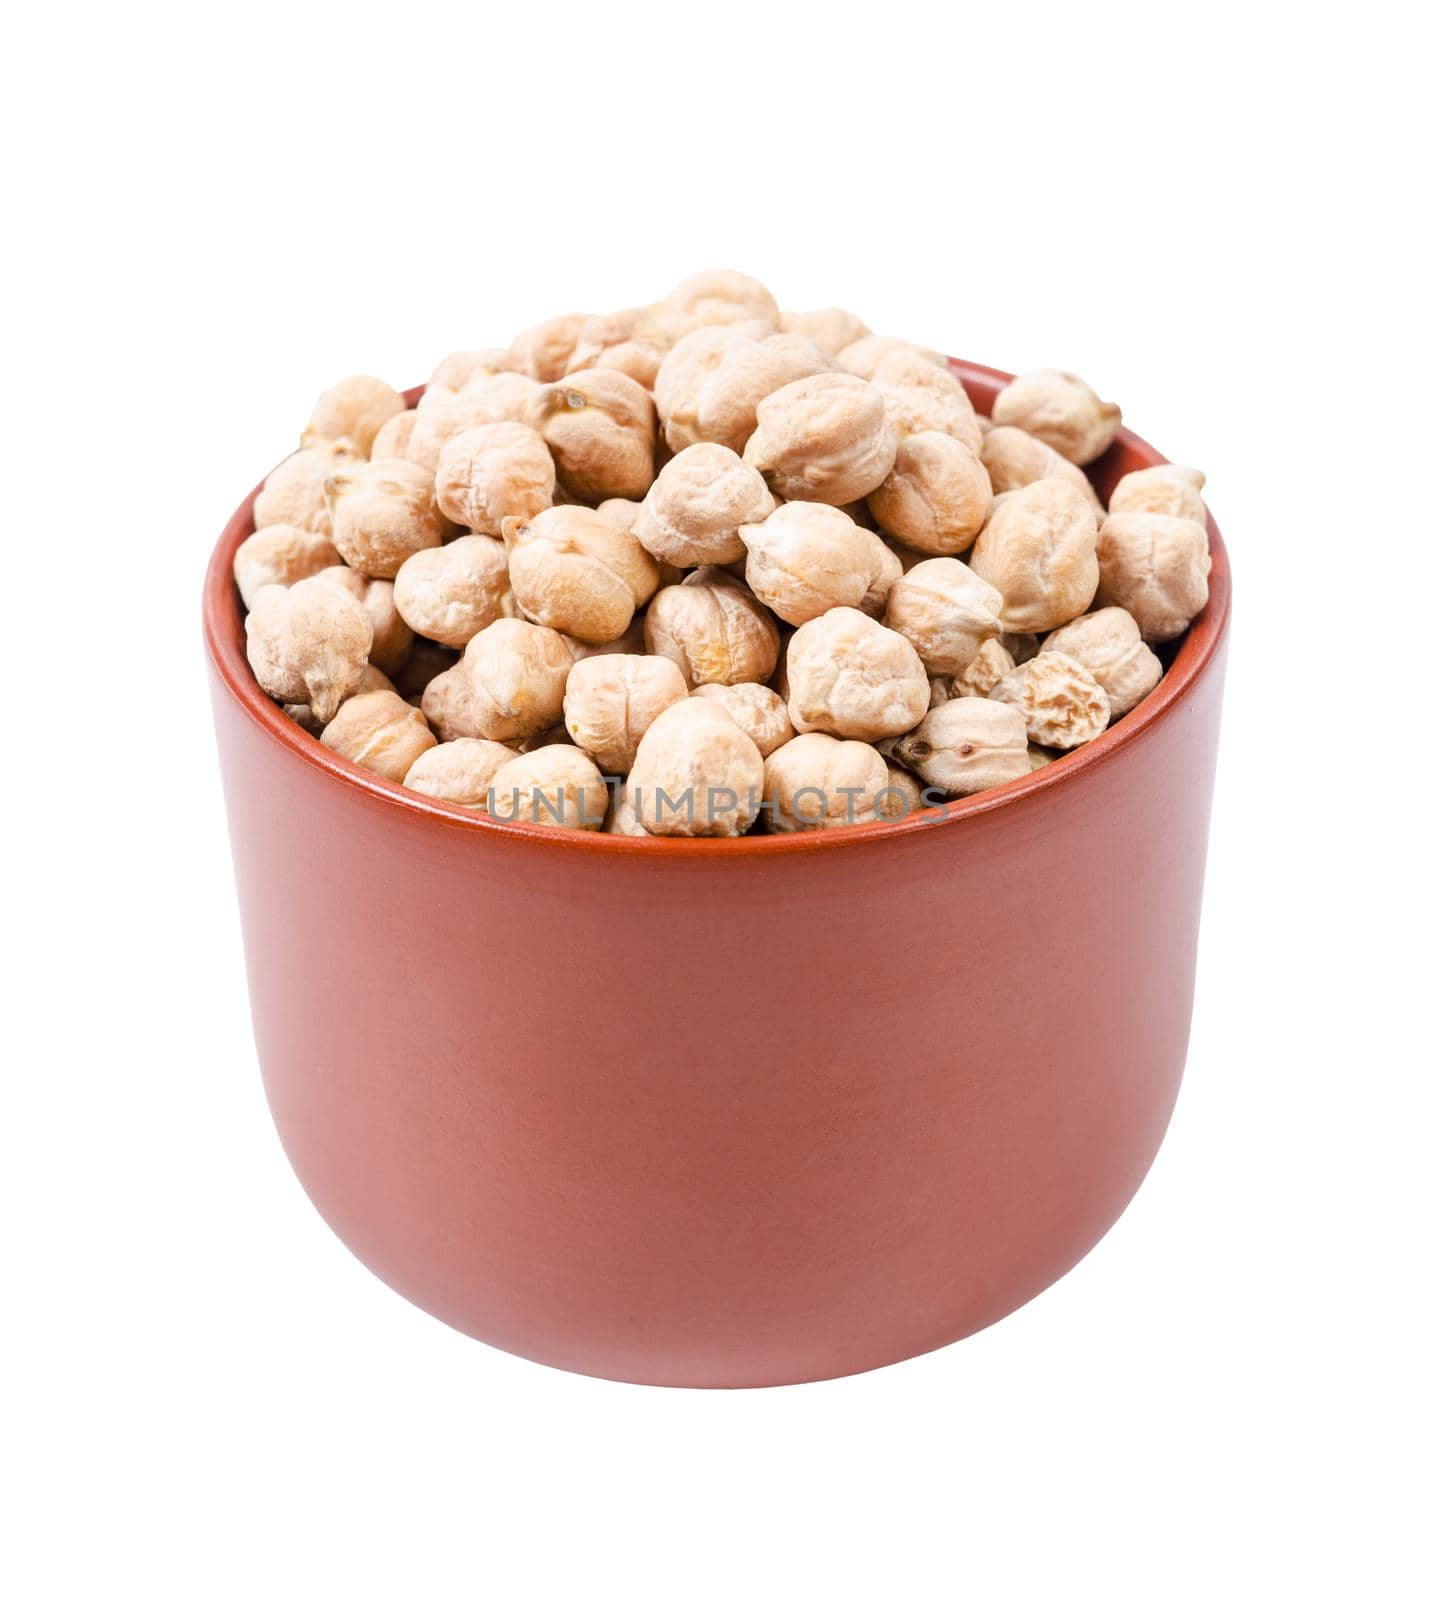 Chickpeas in cup isolated on white background, Save clipping path.